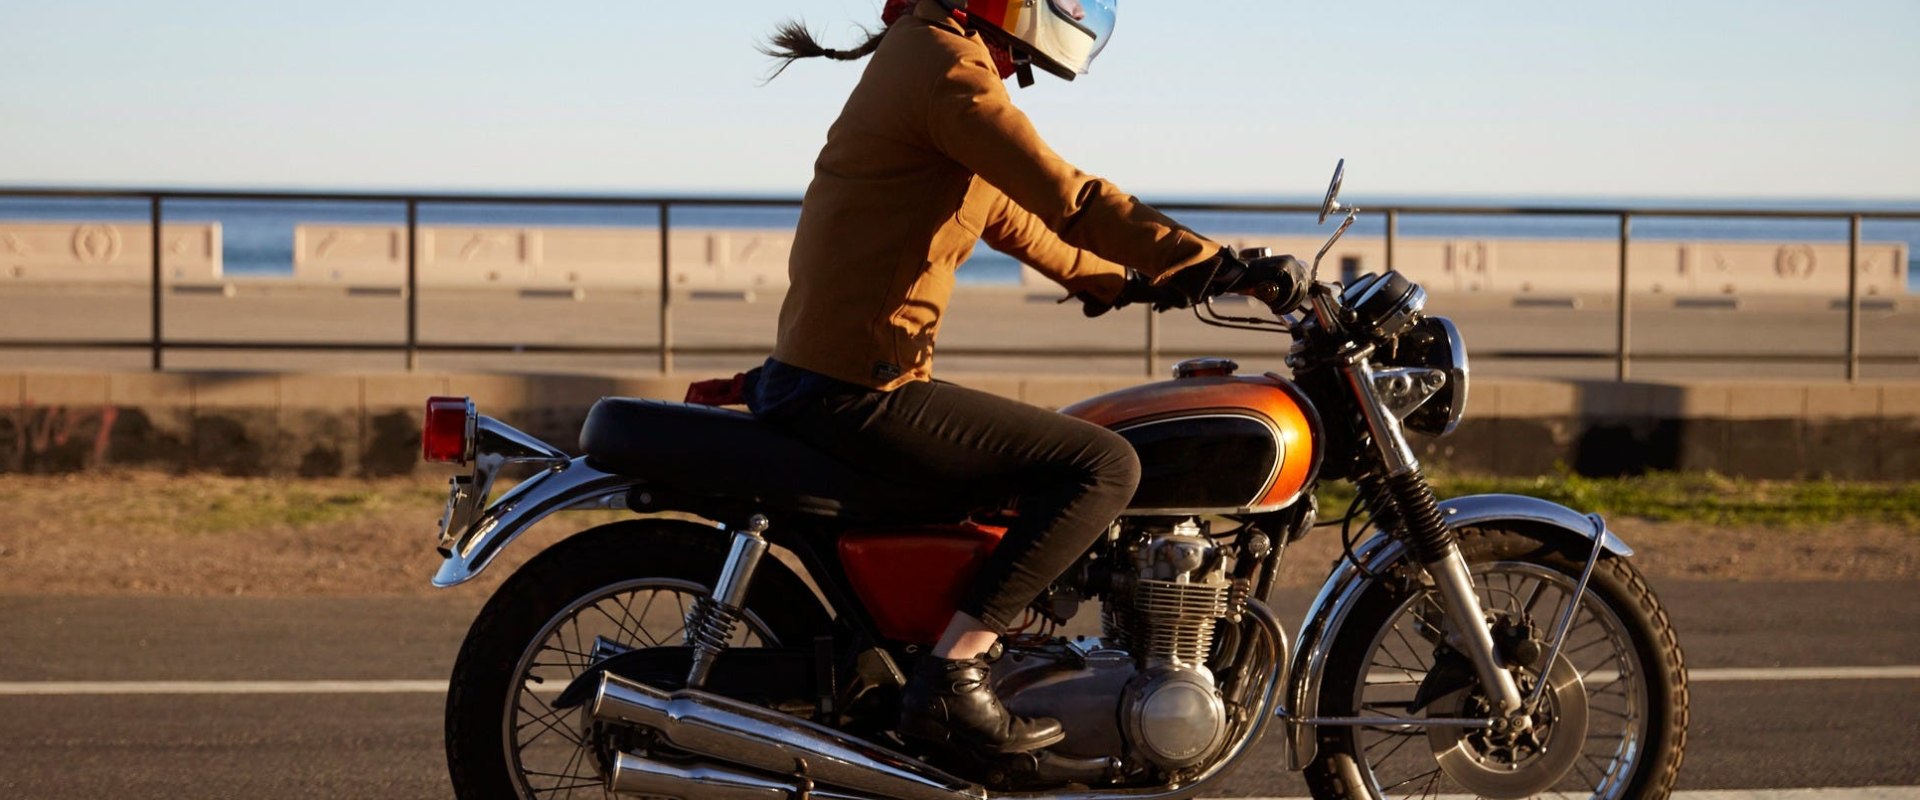 Getting the Right Motorcycle Insurance Coverage